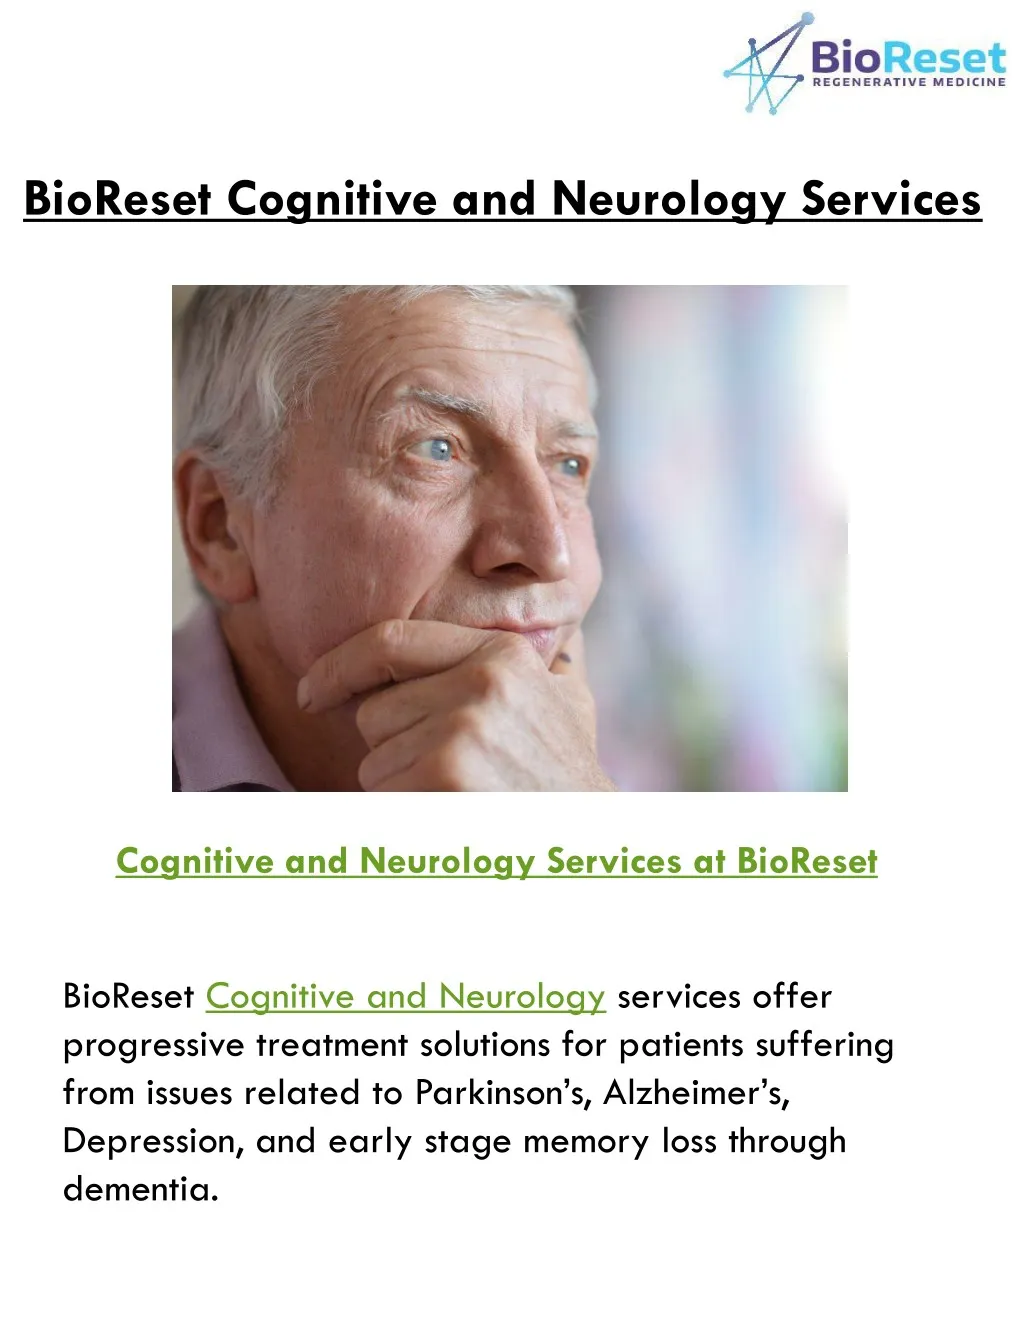 bioreset cognitive and neurology services